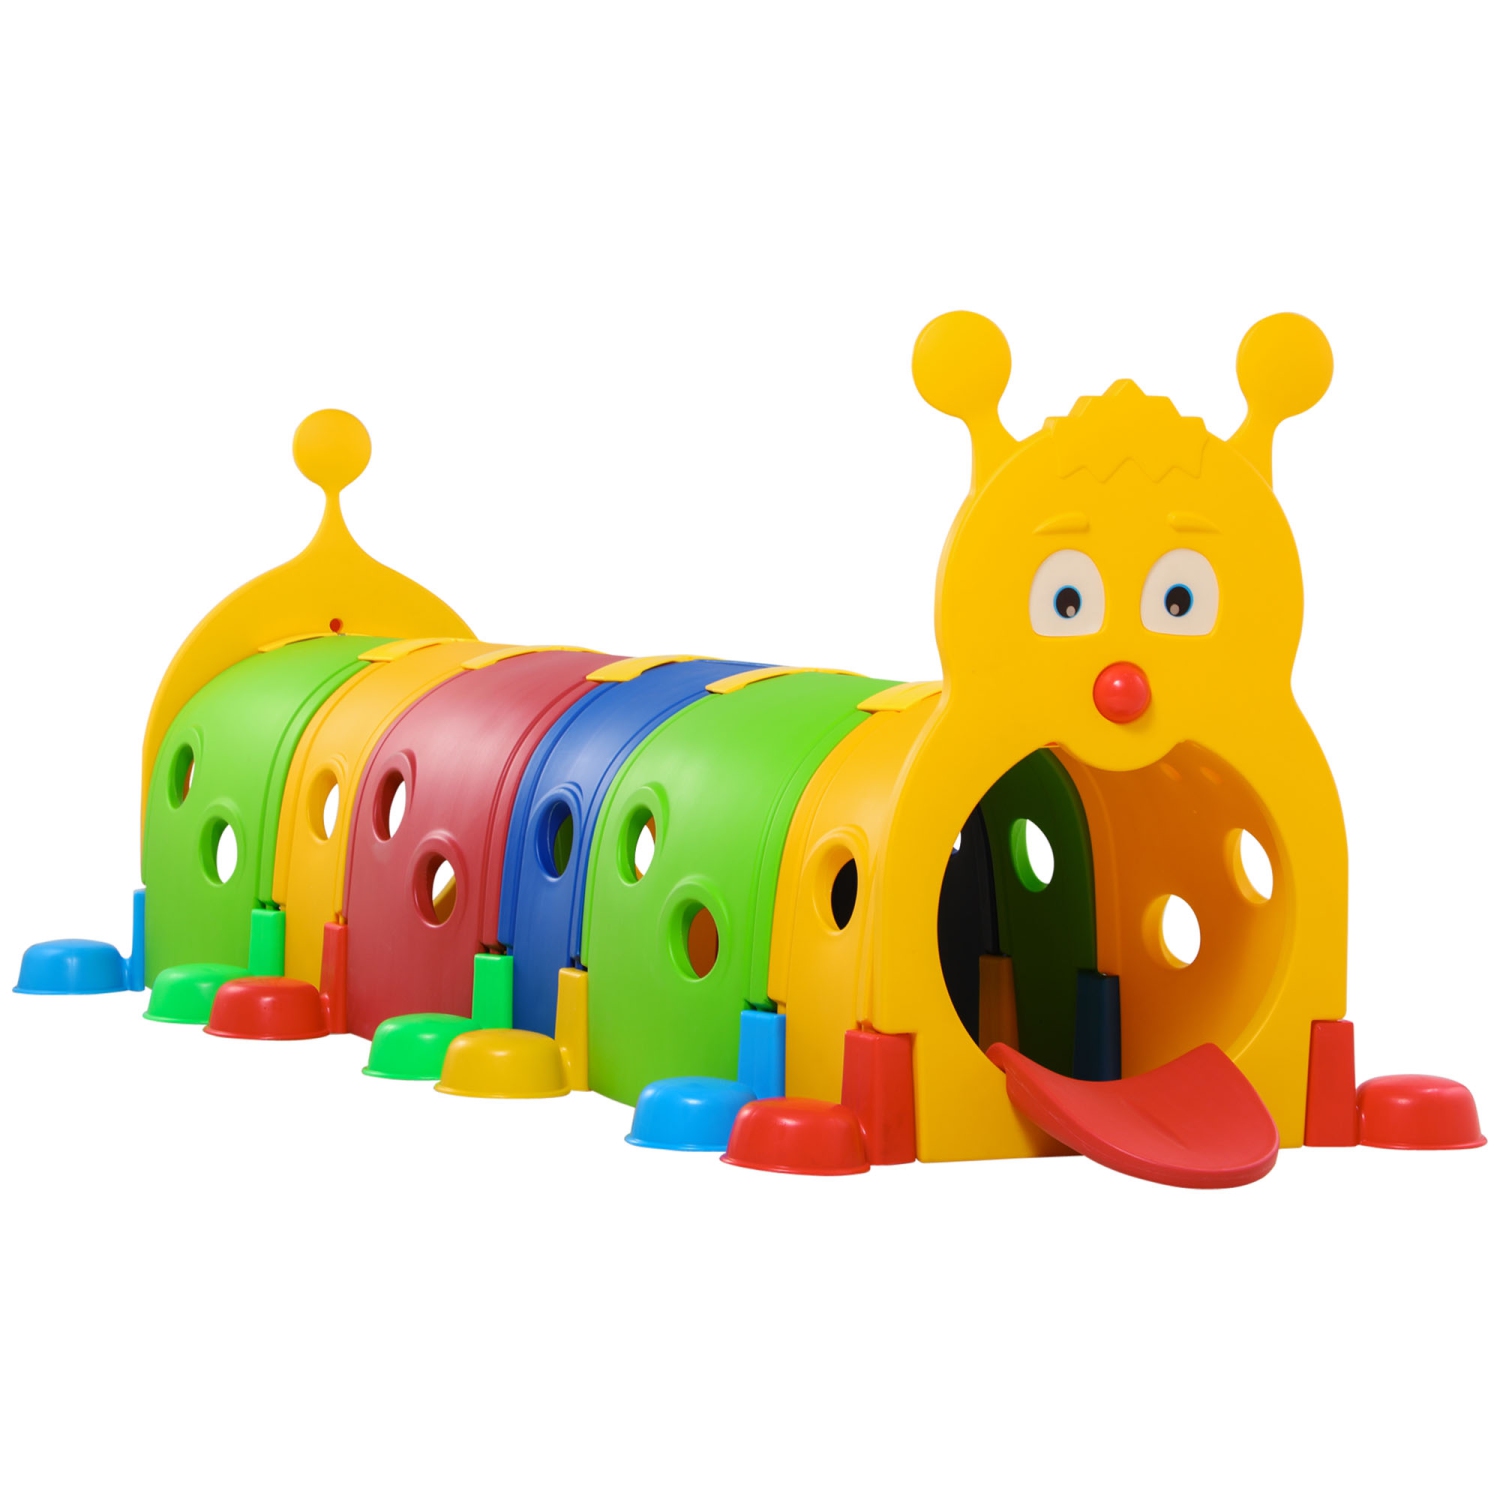 Qaba Caterpillar Play Tunnels, Kids Tunnel for Toddlers to Crawl Through Climbing Toy Indoor & Outdoor Play Structure for 3-6 Years Old, 106.7" x 39.8" x 41.3"